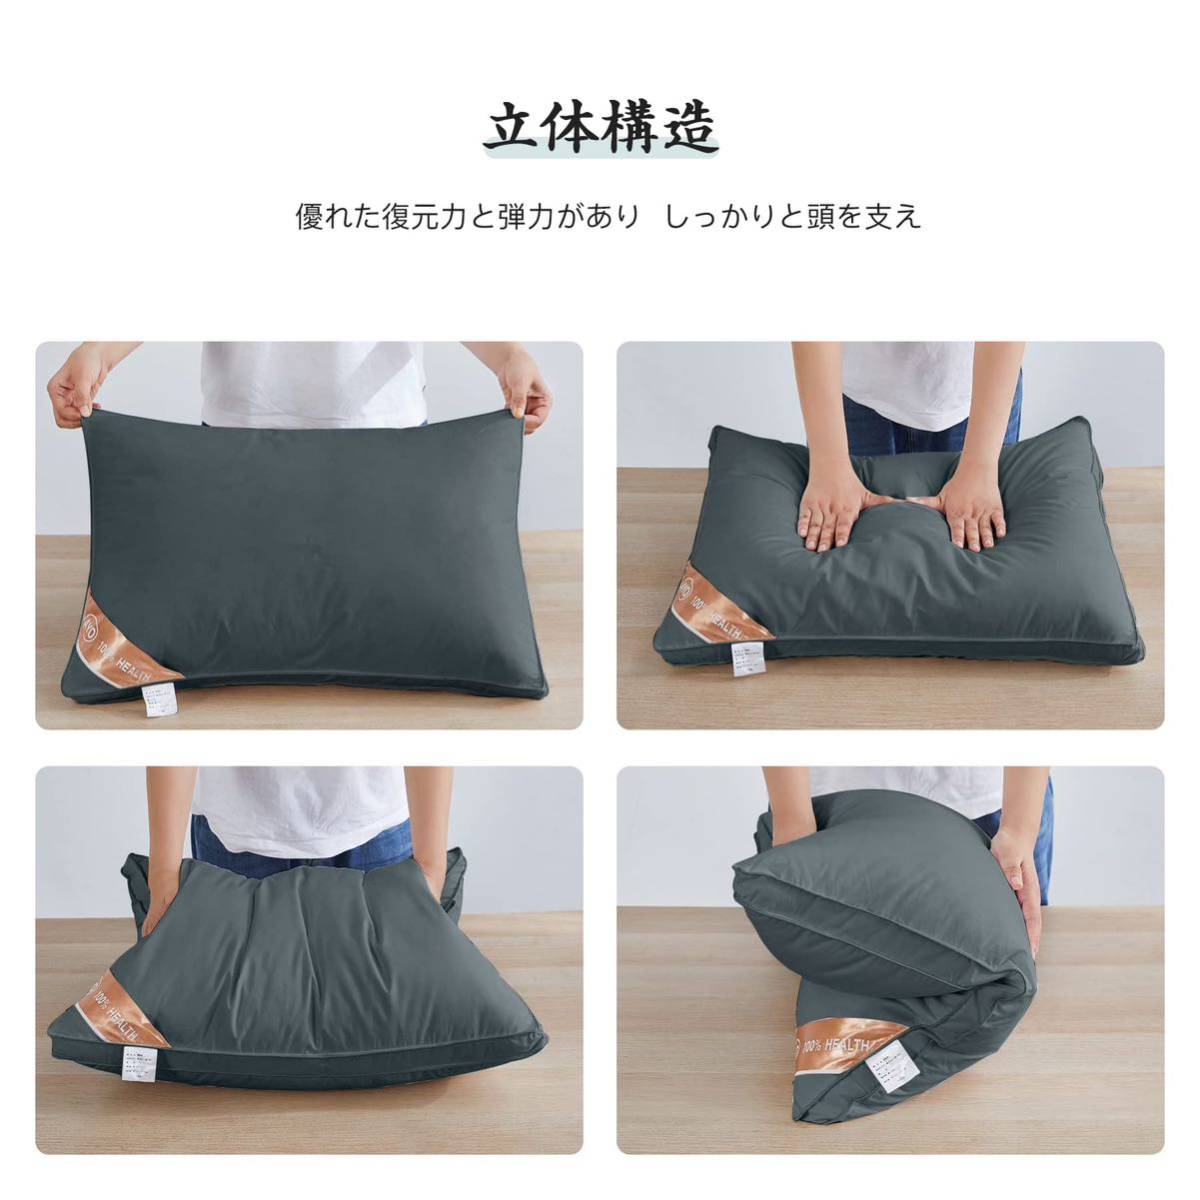 ma.. high class hotel specification height repulsion pillow width direction correspondence circle wash possibility solid structure pillow liner removed possibility ( gray, 30cm*50cm*18cm)